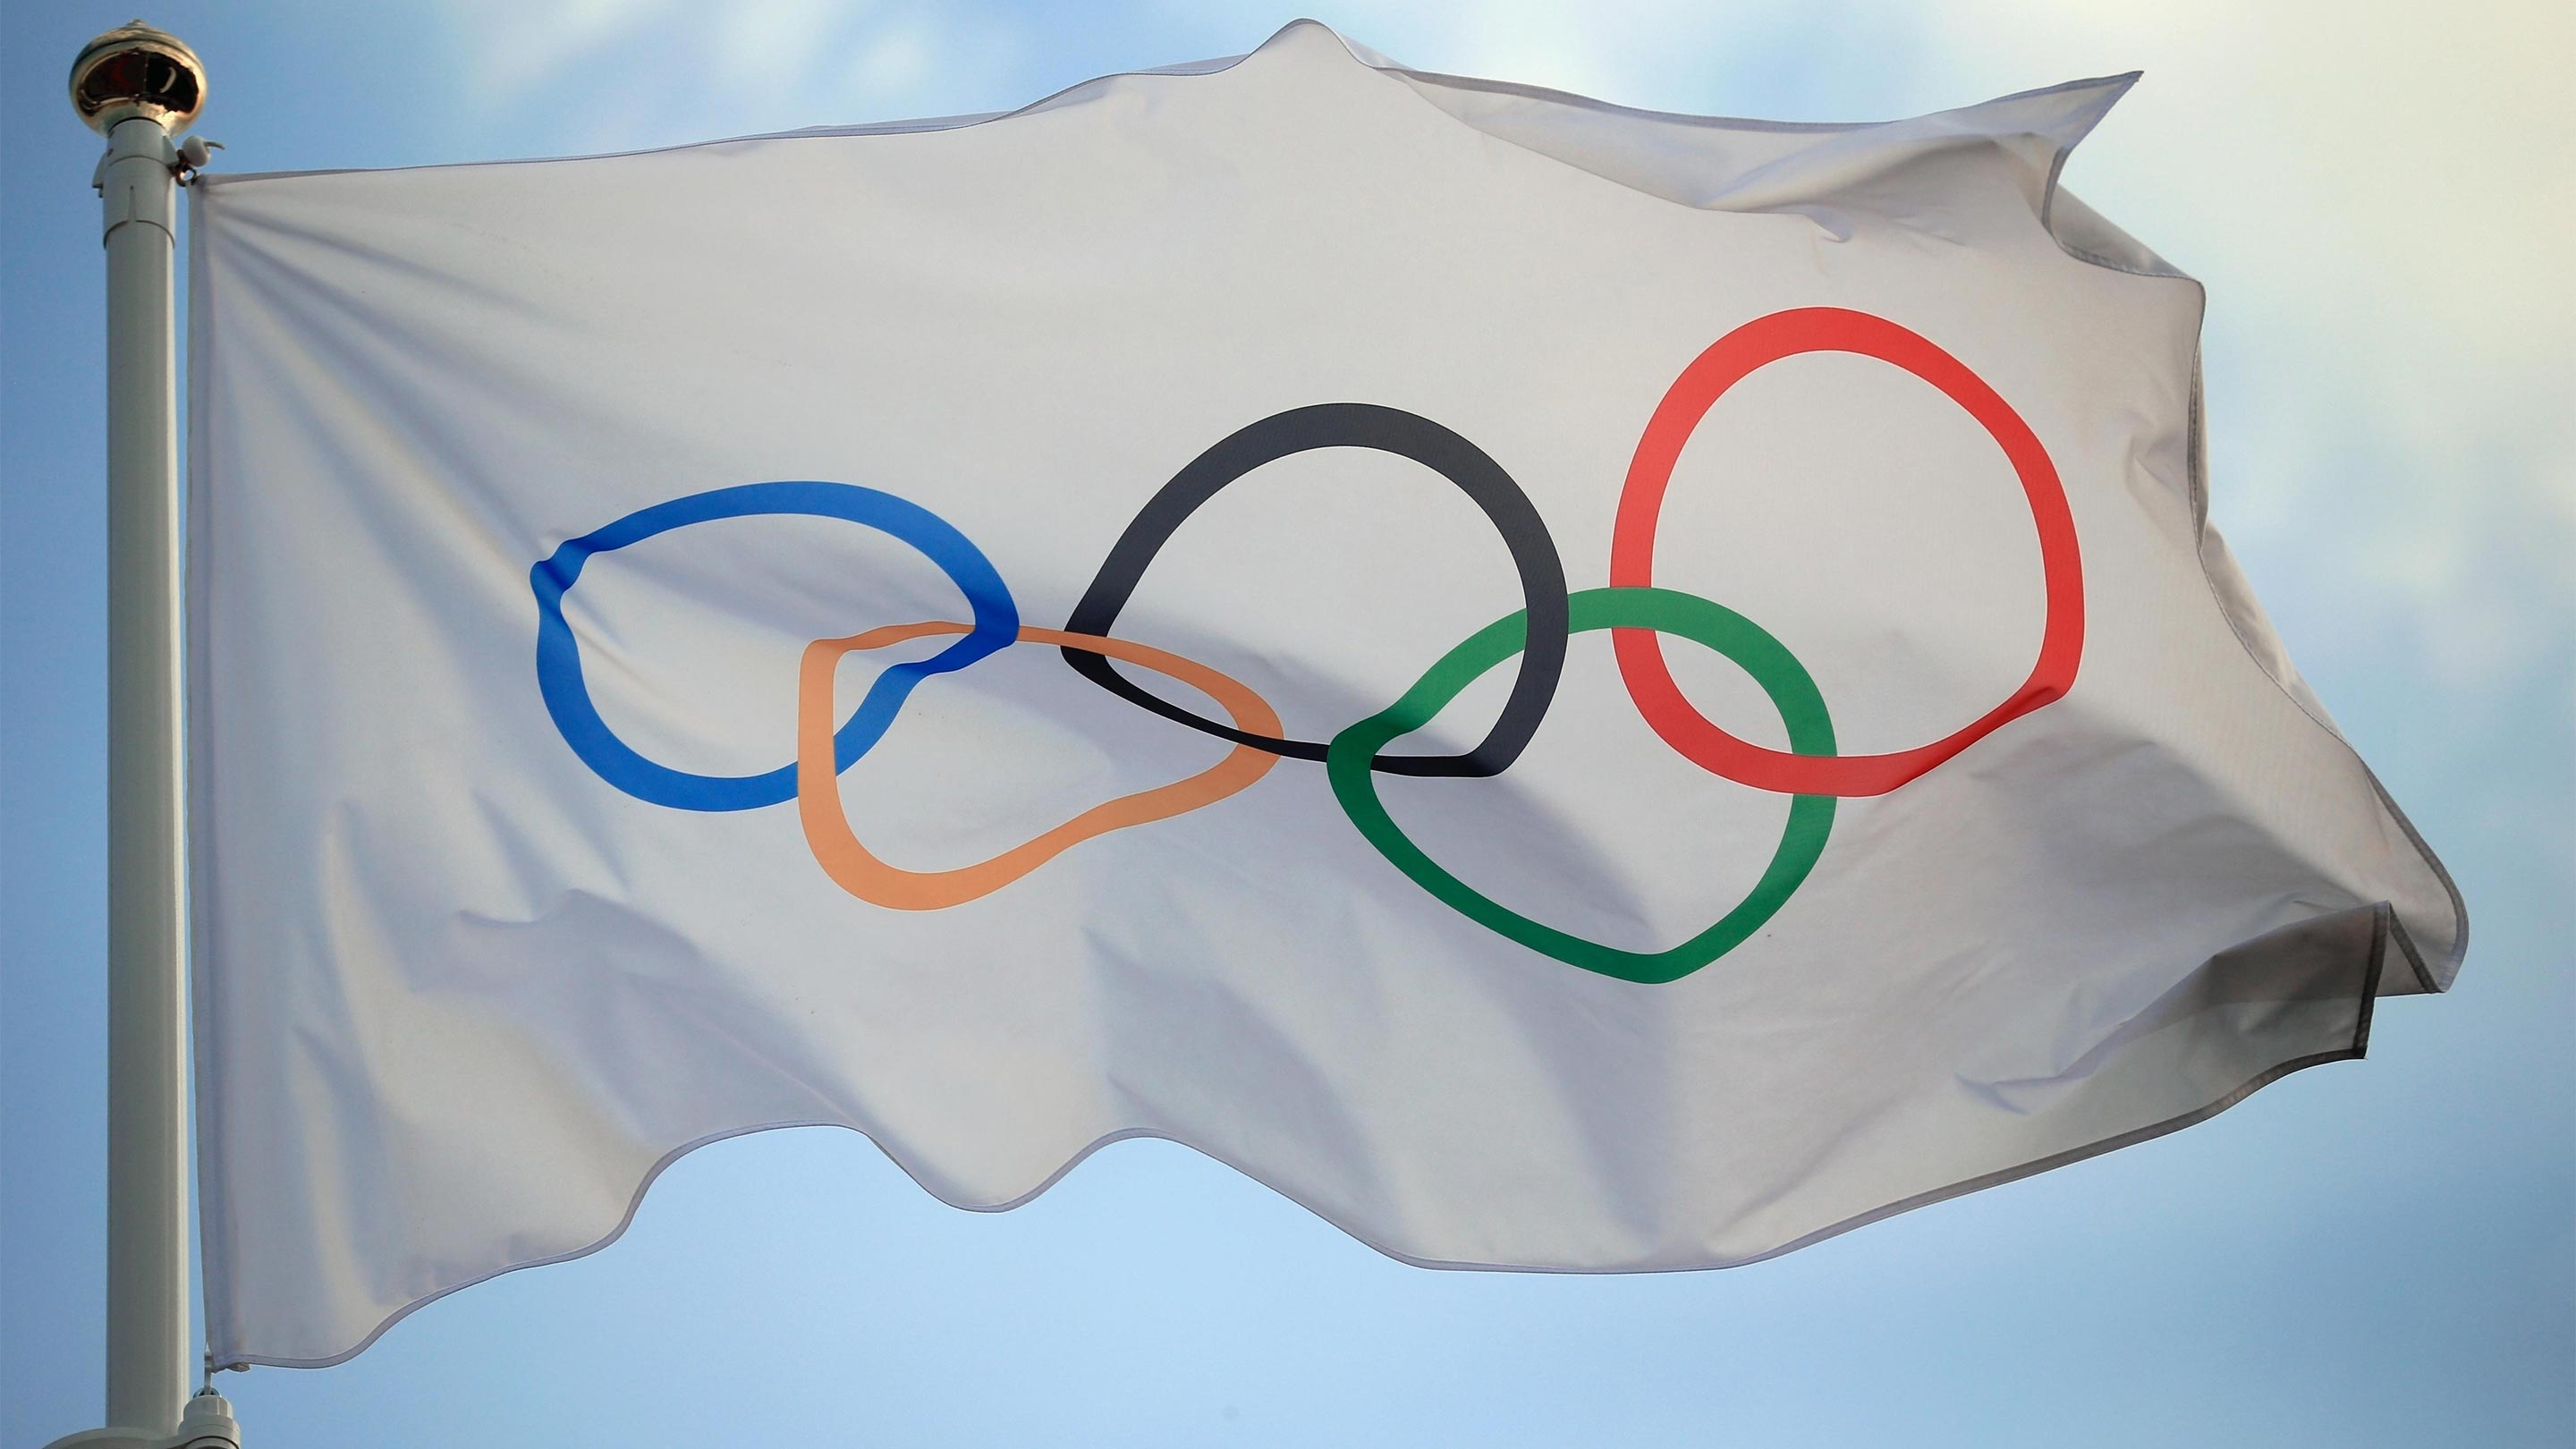 team-of-refugee-olympic-athletes-roa-created-by-the-ioc-olympic-news